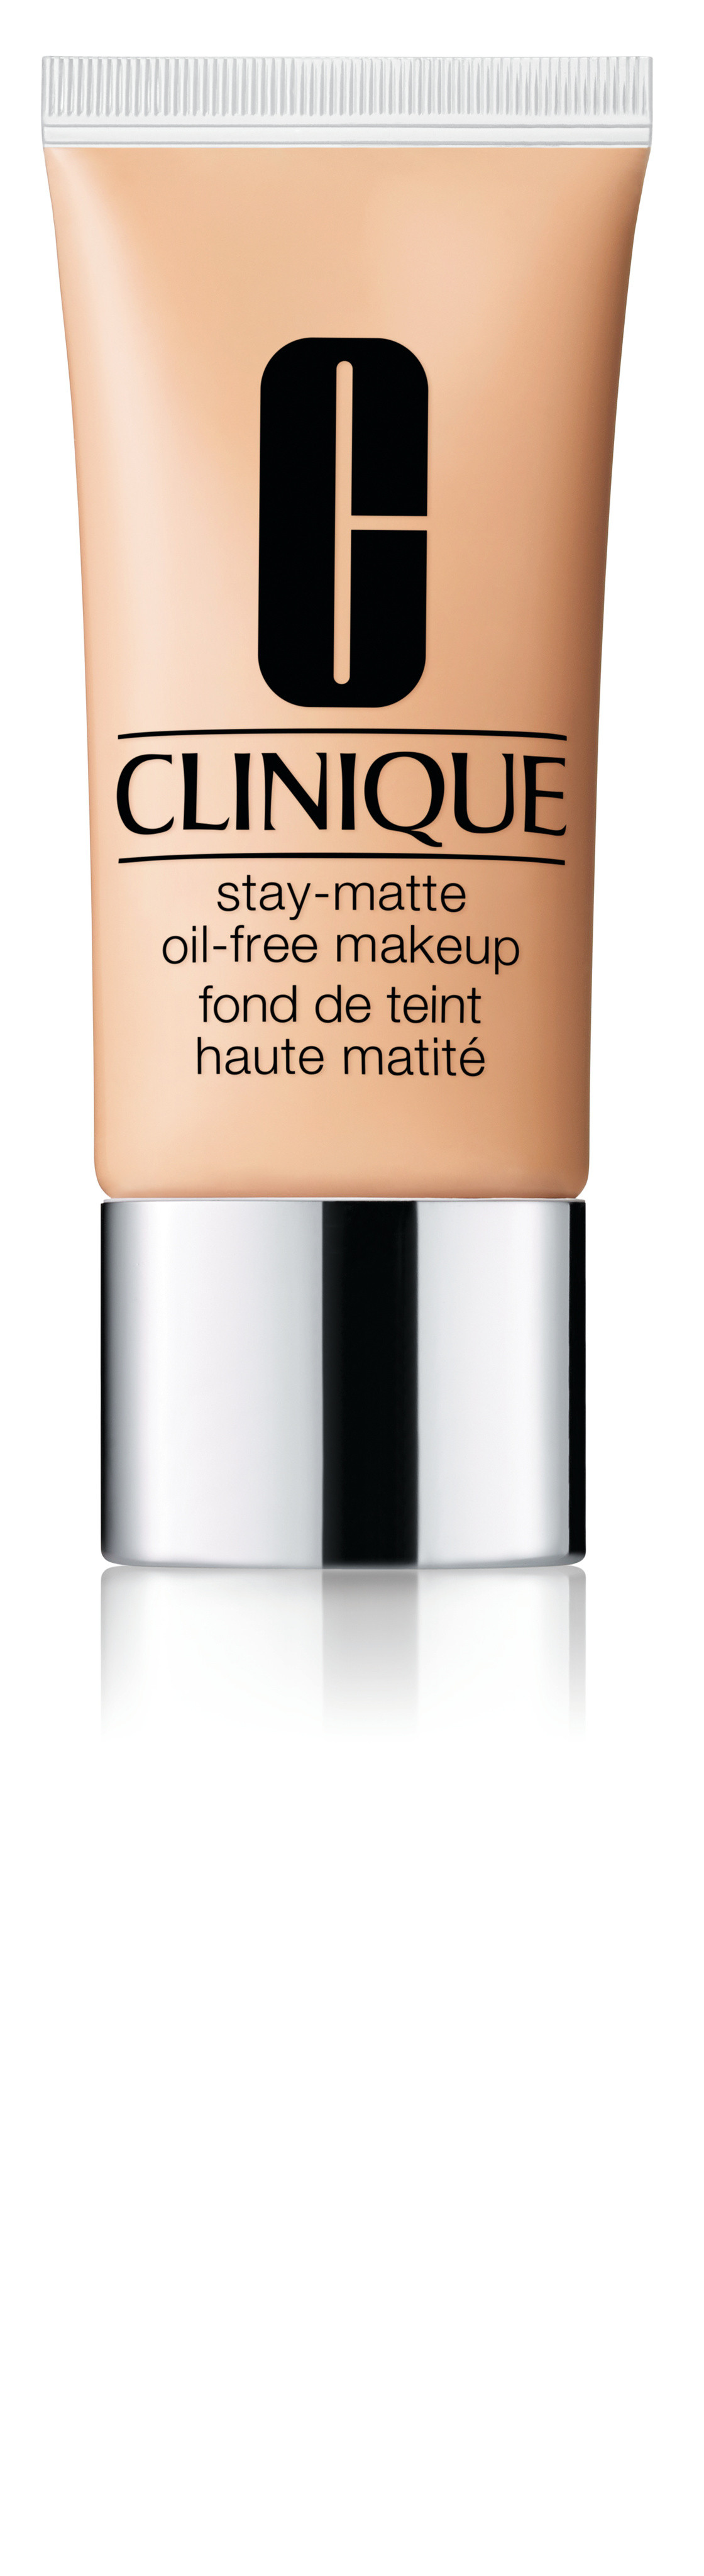 Clinique stay-matte oil-free make-up - cn 90 sand  30 ml, CN 90 SAND, large image number 0